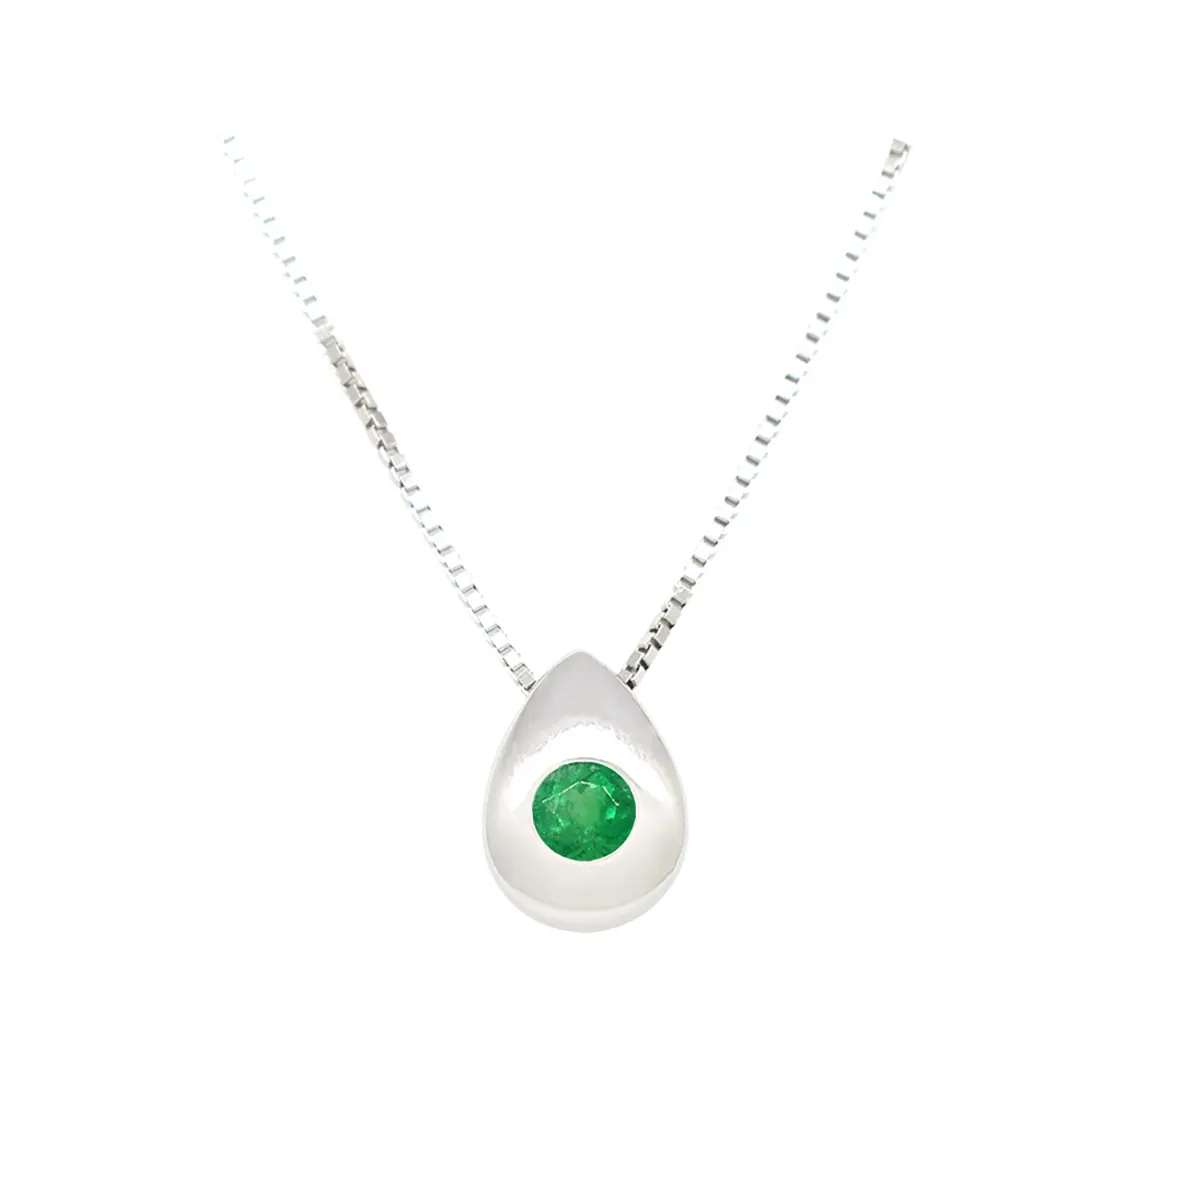 emerald-necklace-in-18k-white-gold-with-genuine-round-cut-emerald